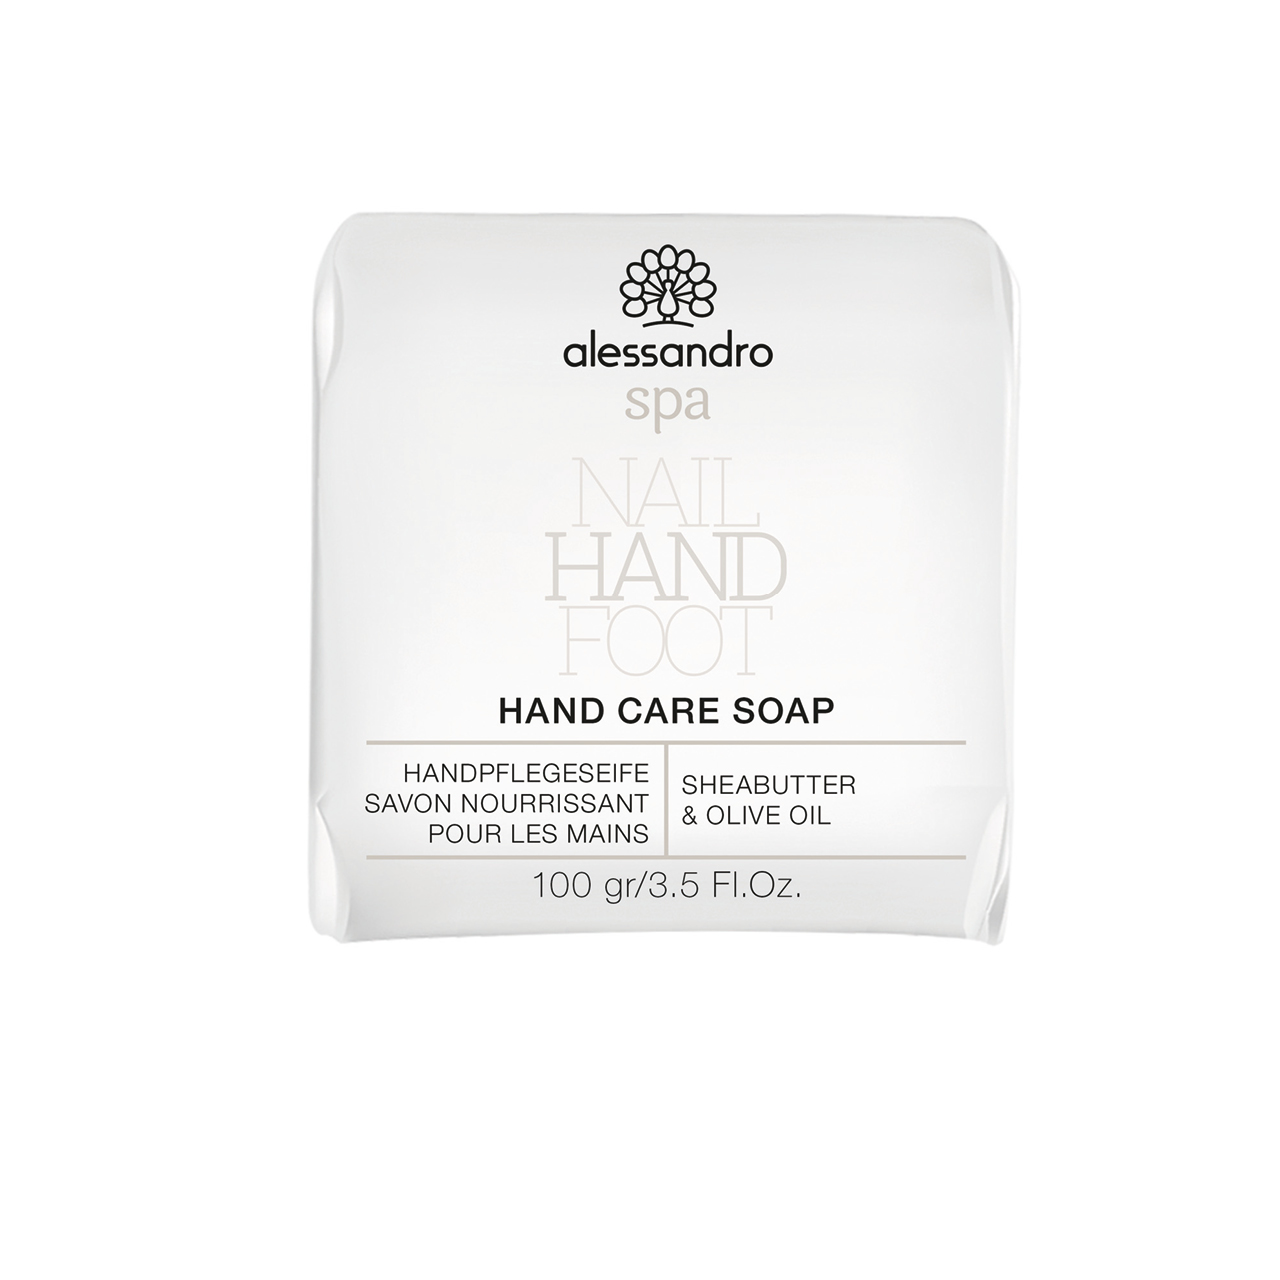 Hand Care Soap